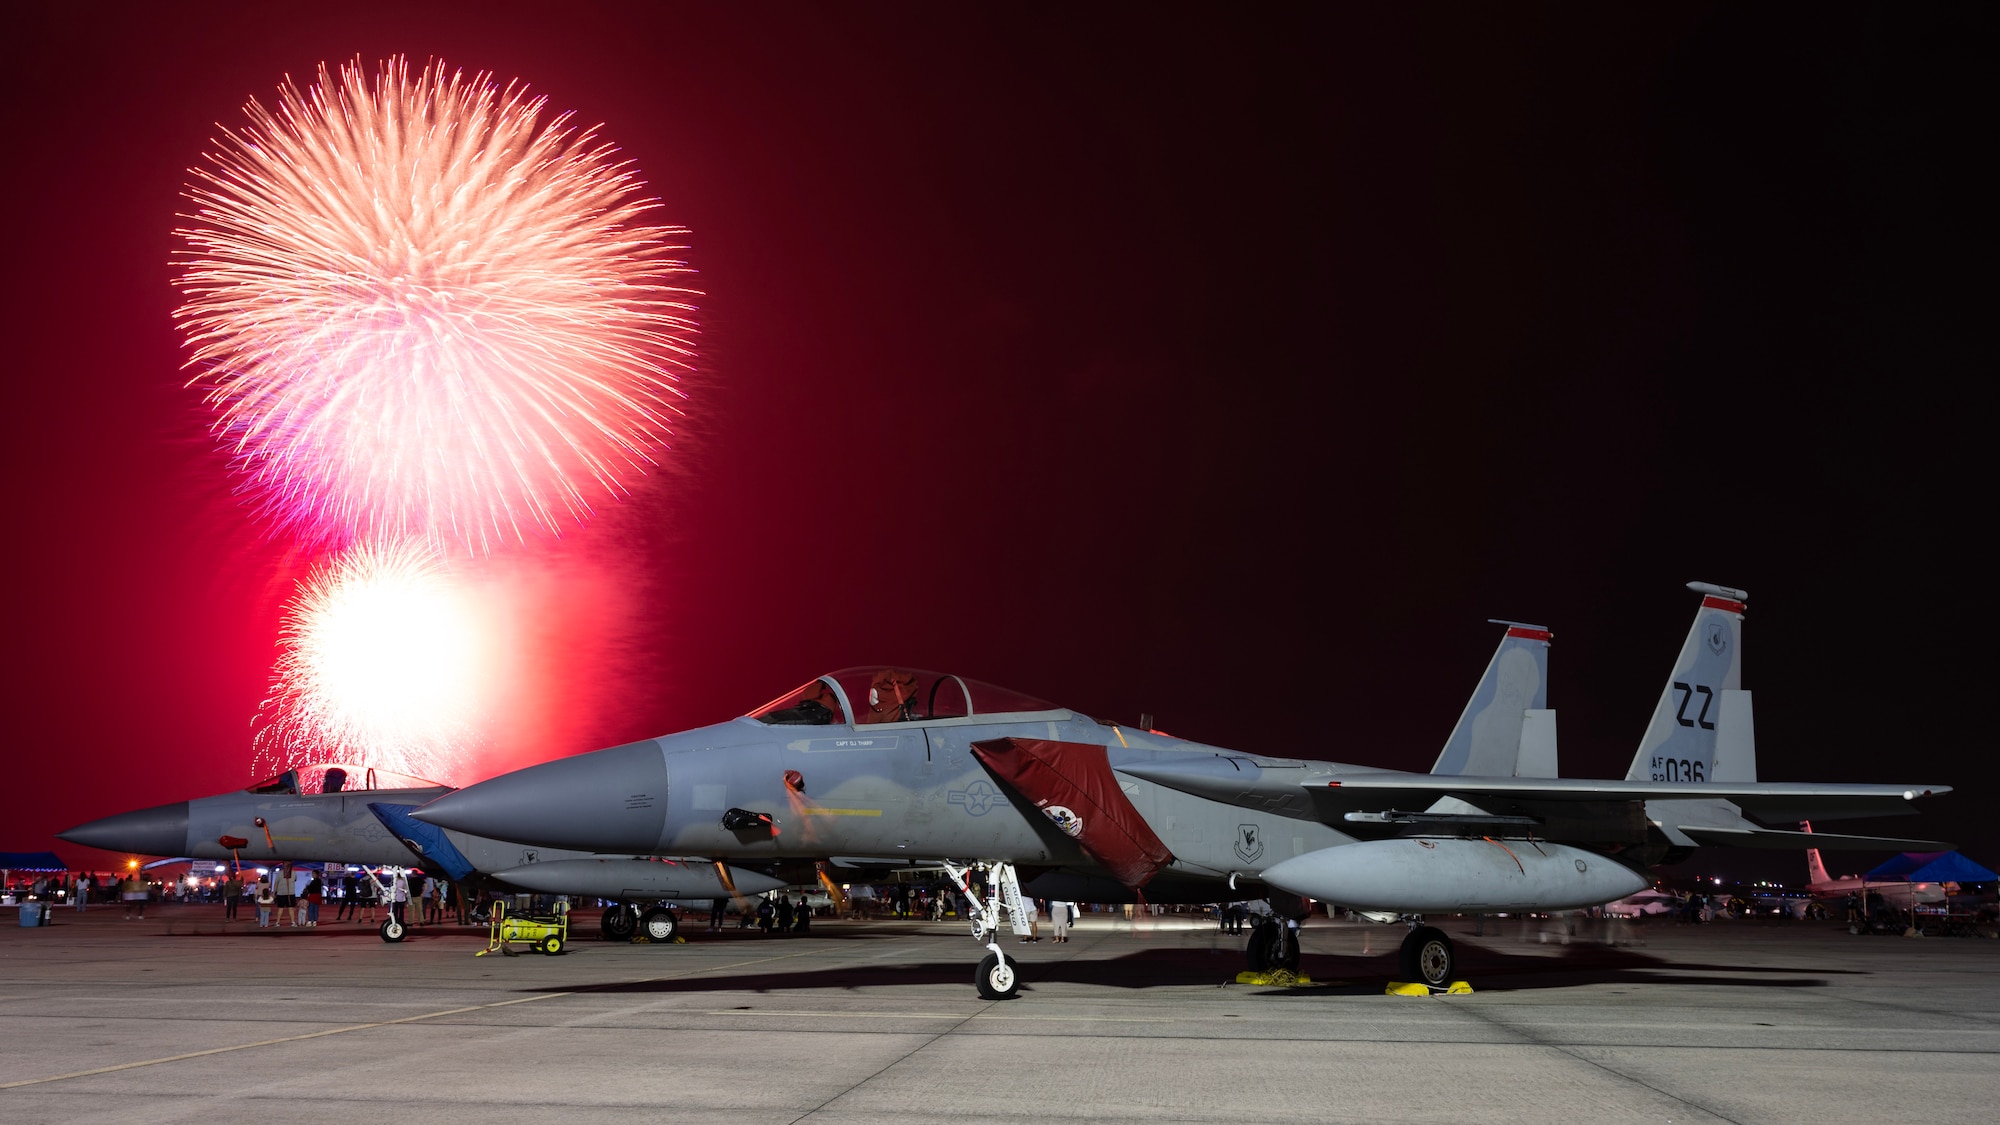 U.S. Air Force F-15C Eagles are on display as a fireworks presentation closes out day one of America Fest 2023 at Kadena Air Base, Japan, April 22, 2023. America Fest is Kadena Air Base’s open house event where attendees viewed static aircraft displays, interacted with U.S. service members and enjoyed a wide variety of entertainment and activities. (U.S. Air Force photo by Senior Airman Jessi Roth)